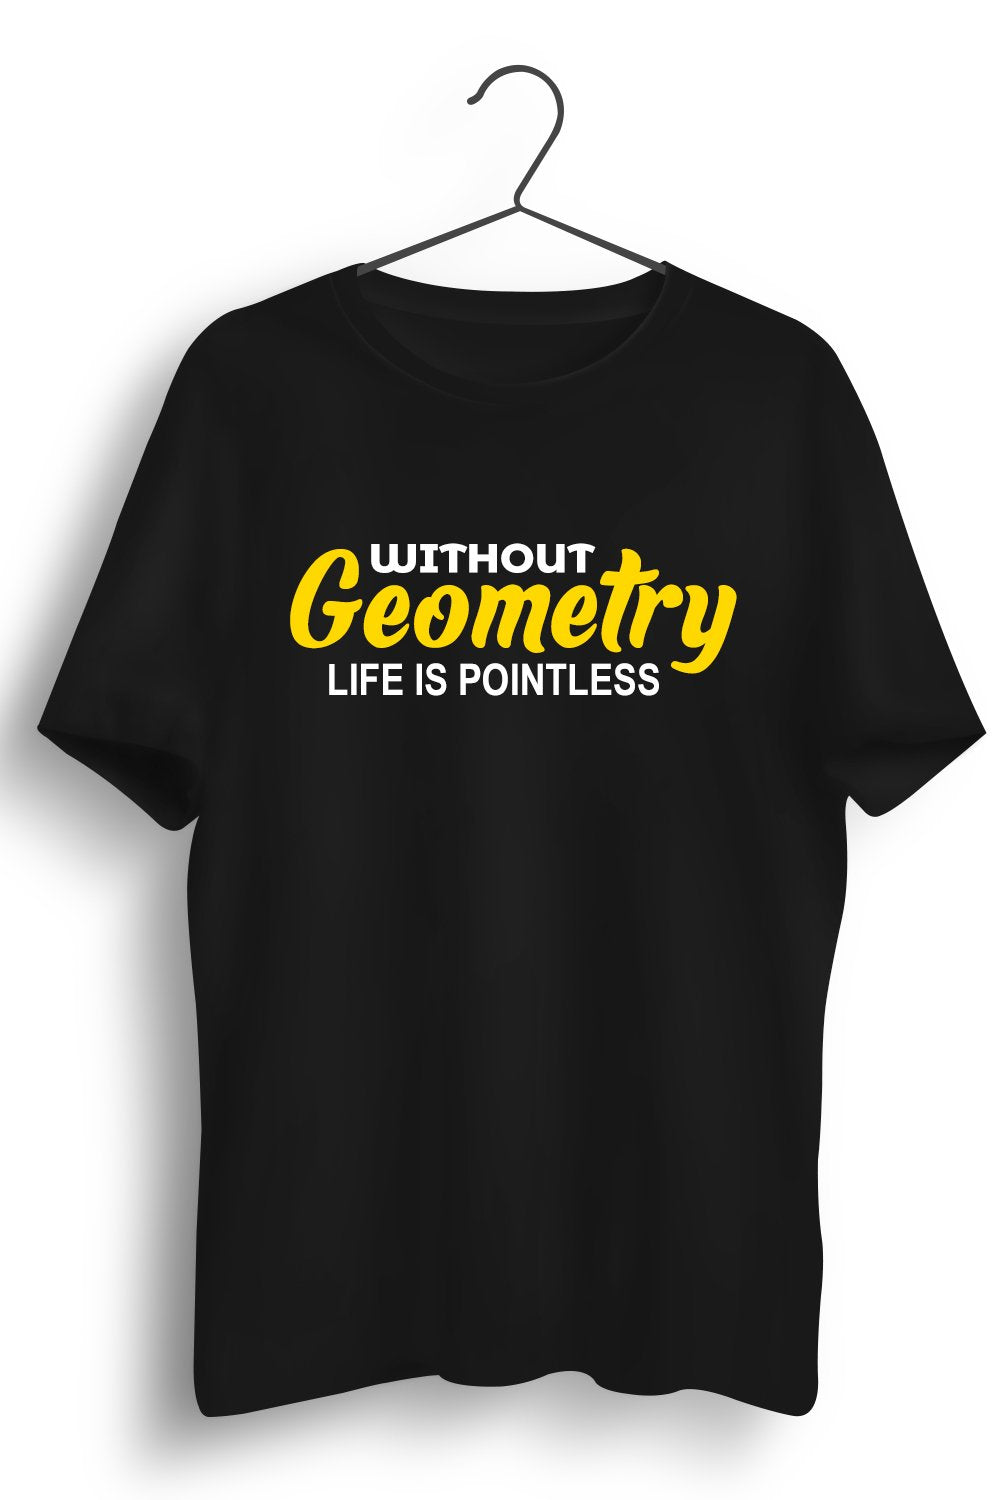 Without Geometry Life is Pointless Black Tshirt